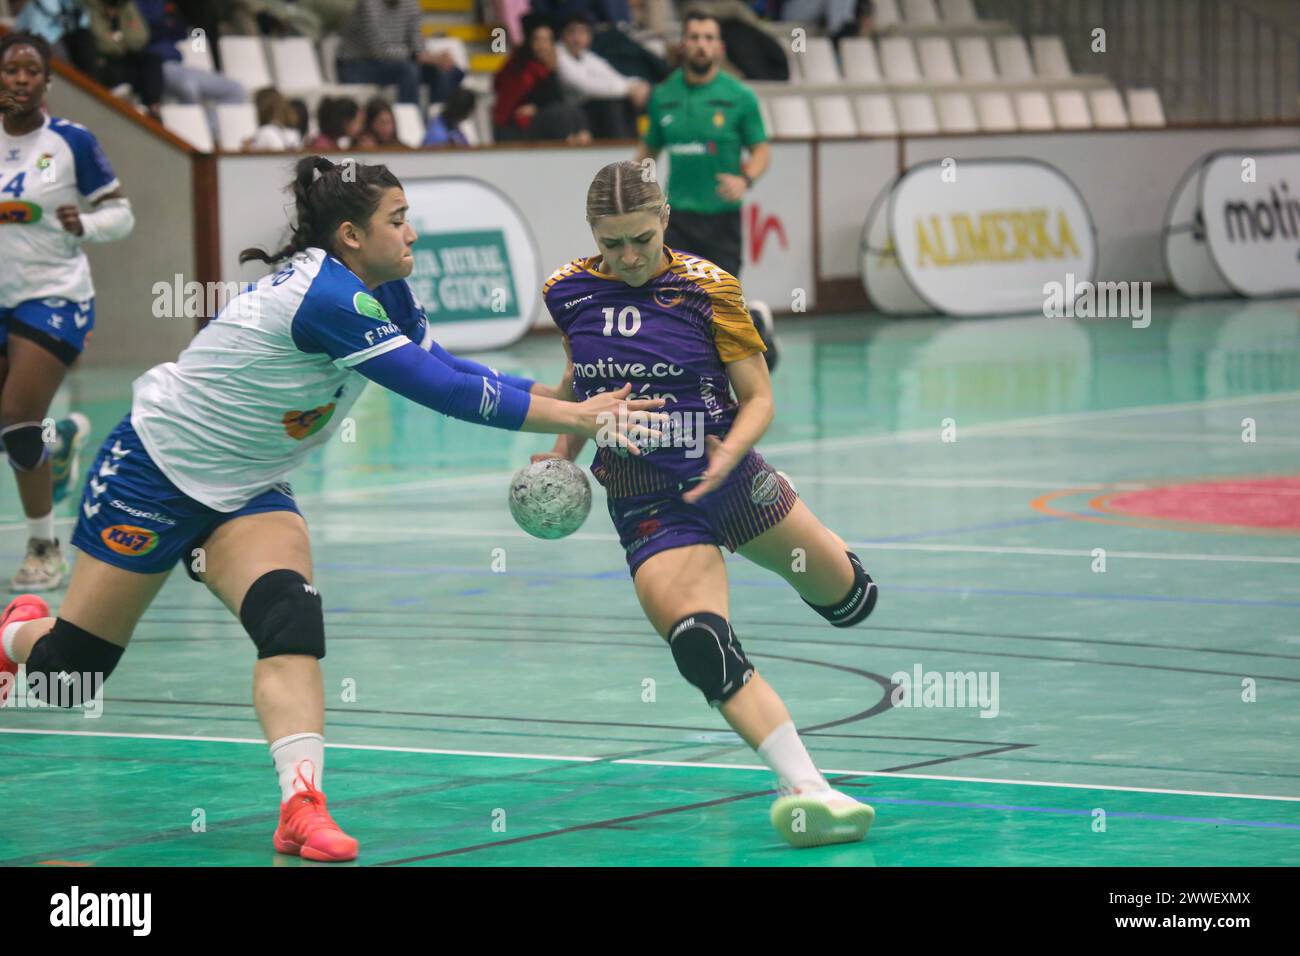 Gijón, Spain, 23th March, 2024: Motive.co Gijón Balonmano La Calzada player, María González (10, R) tries to get away from Giulia Guarieiro (13, L) during the 22nd Matchday of the Liga Guerreras Iberdrola 2023-24 between the Motive.co Gijón Balonmano La Calzada and the KH-7 BM. Granollers, on March 23, 2024, at the La Arena Pavilion, in Gijón, Spain. Credit: Alberto Brevers / Alamy Live News. Stock Photo